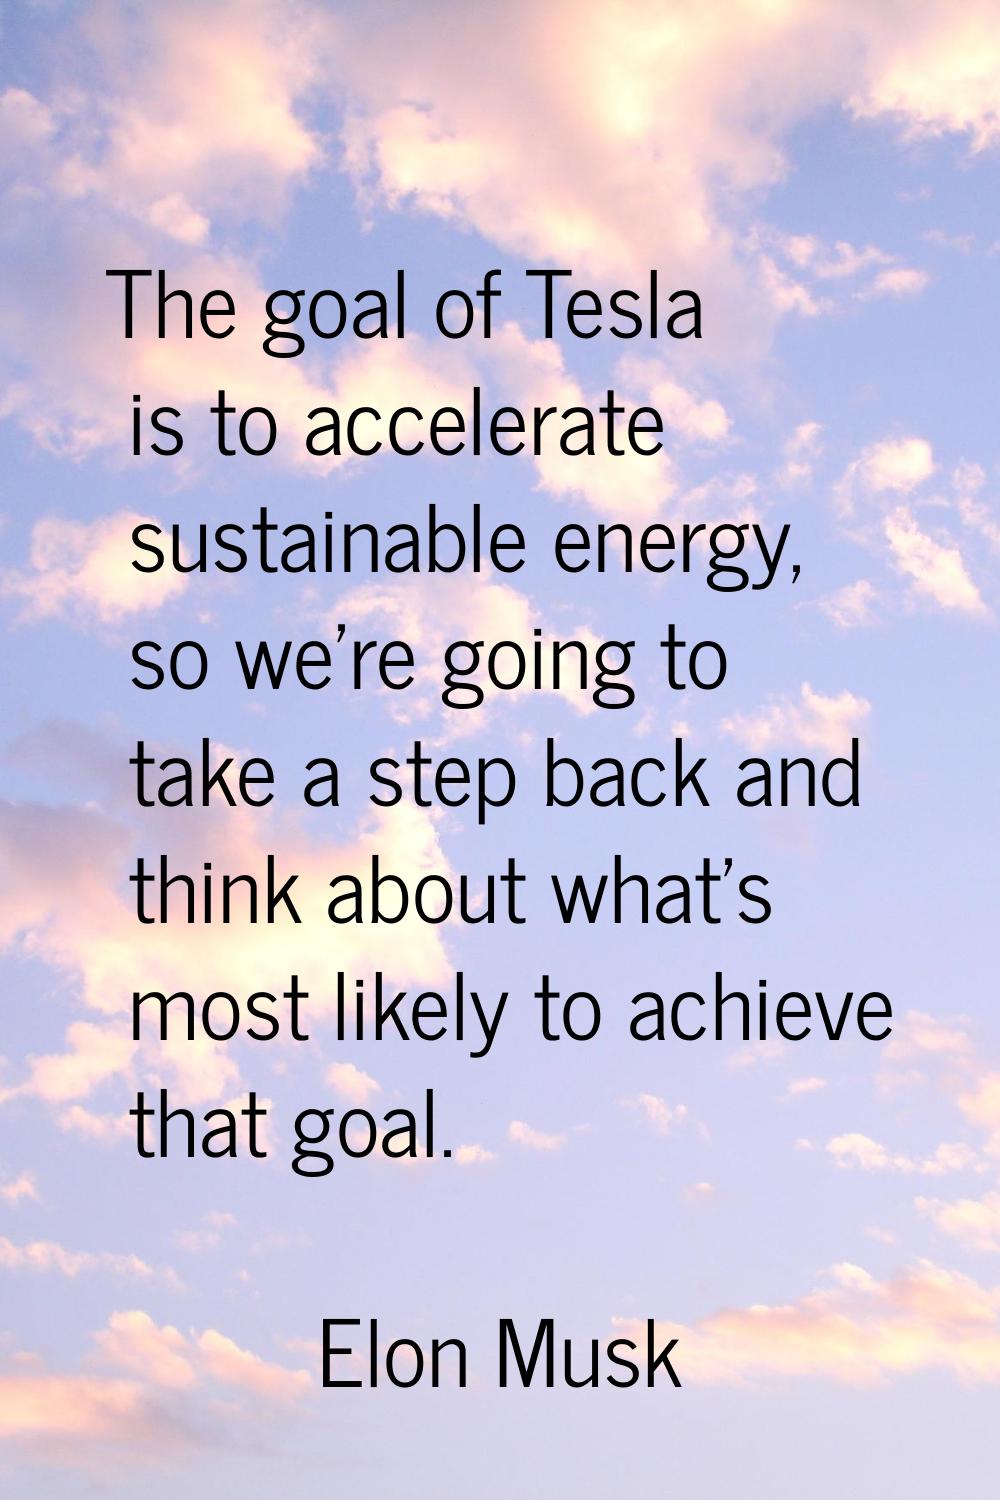 The goal of Tesla is to accelerate sustainable energy, so we're going to take a step back and think